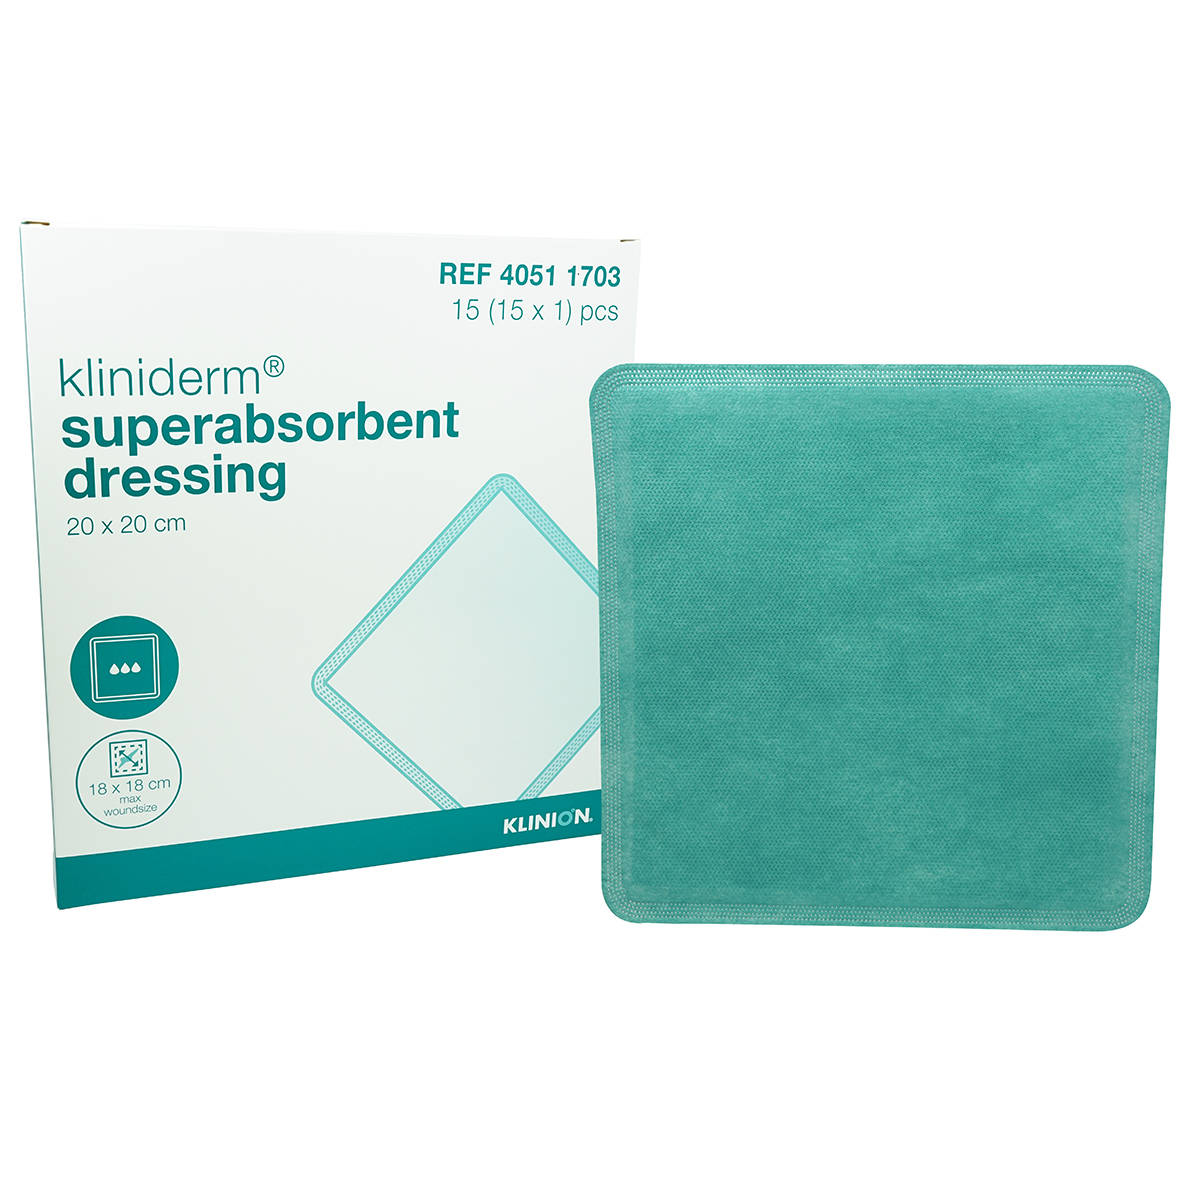 Green superabsorbent dressing with box